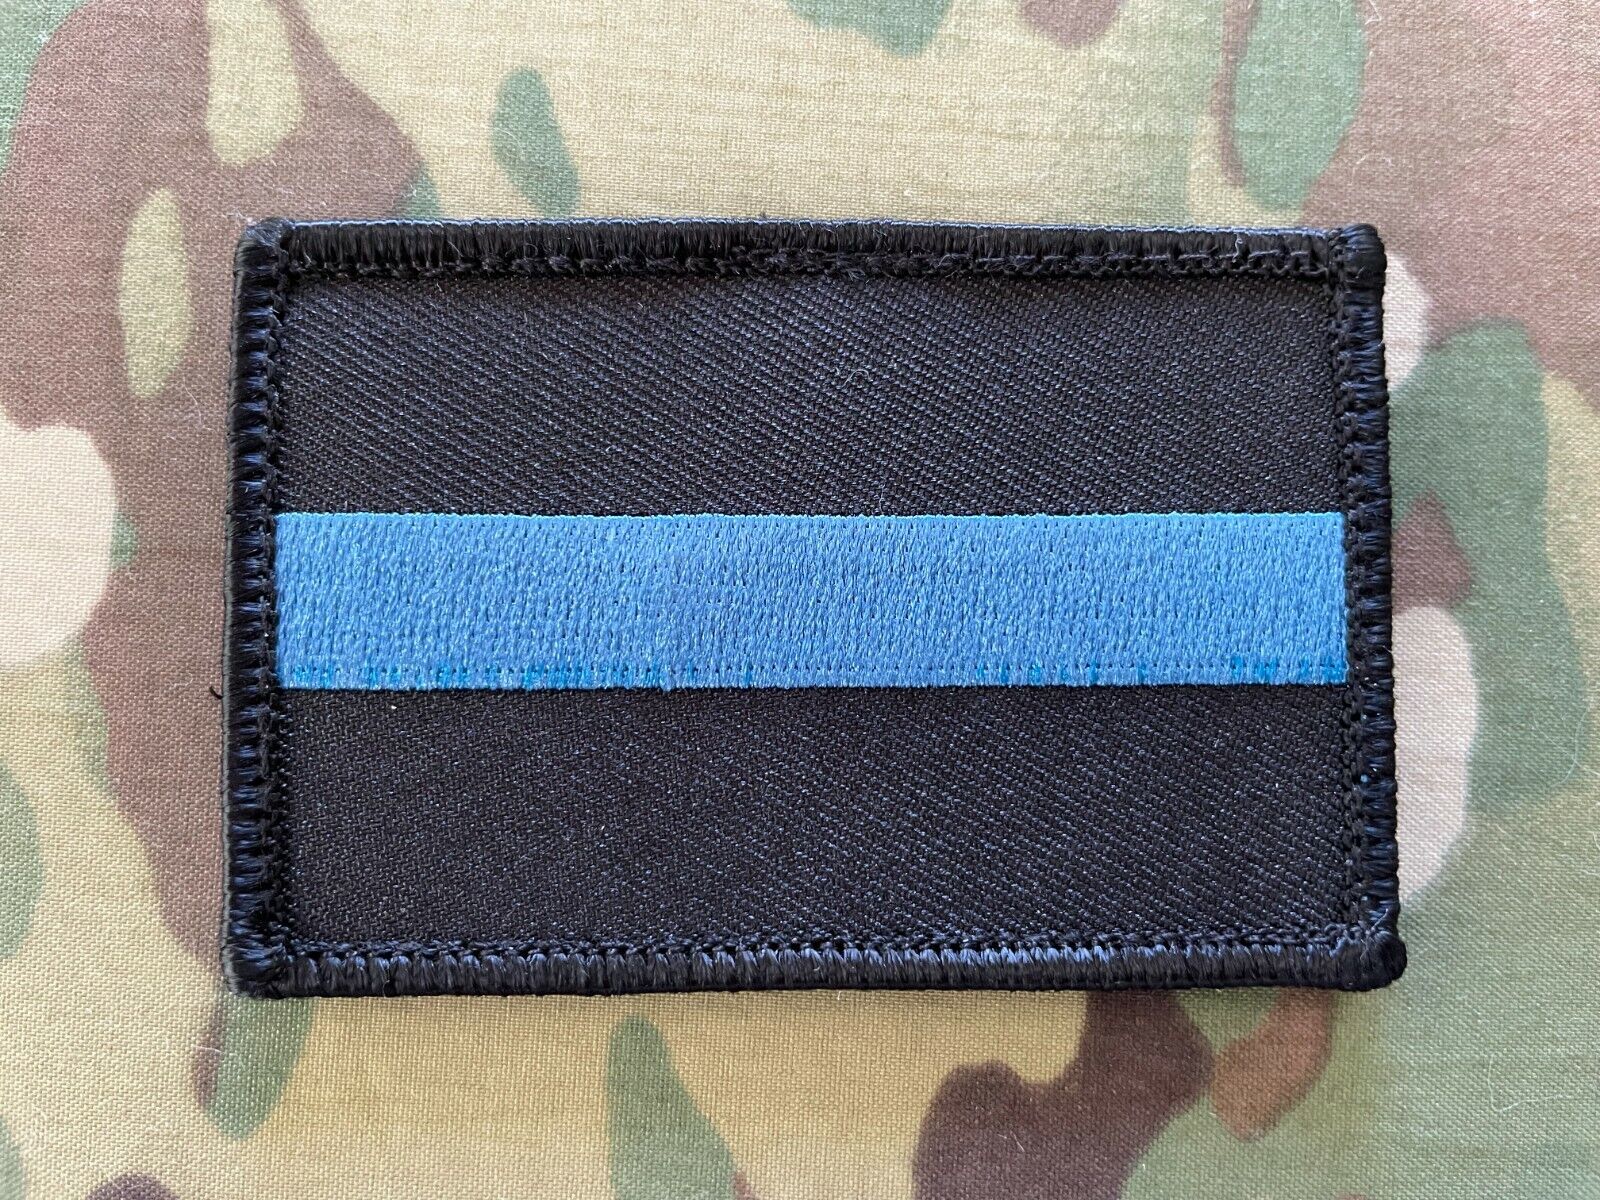 THIN BLUE LINE POLICE MORALE PATCH LAW ENFORCEMENT OFFICER SWAT TACTICAL NYPD LE